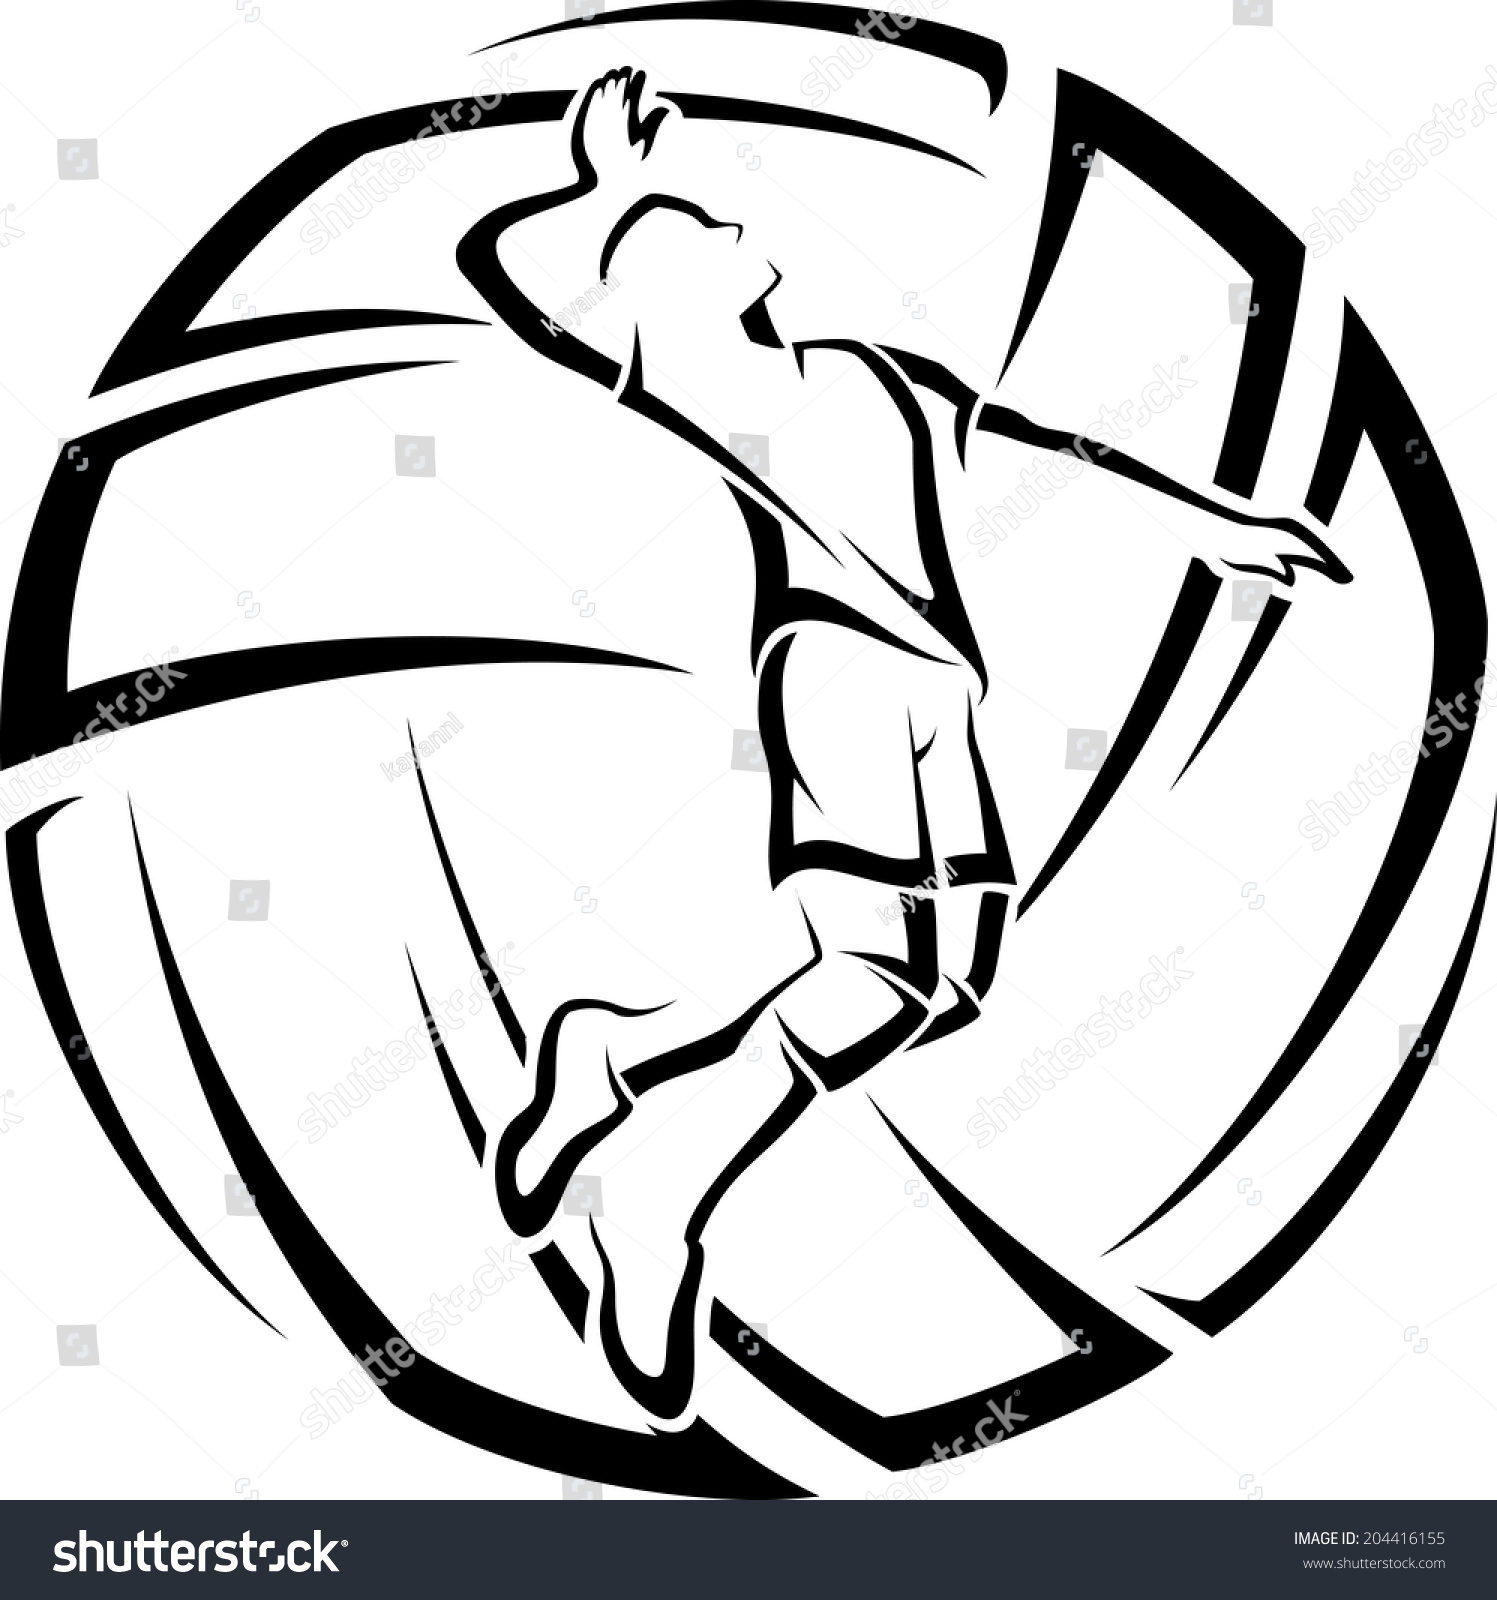 volleyball outline clip art - photo #25